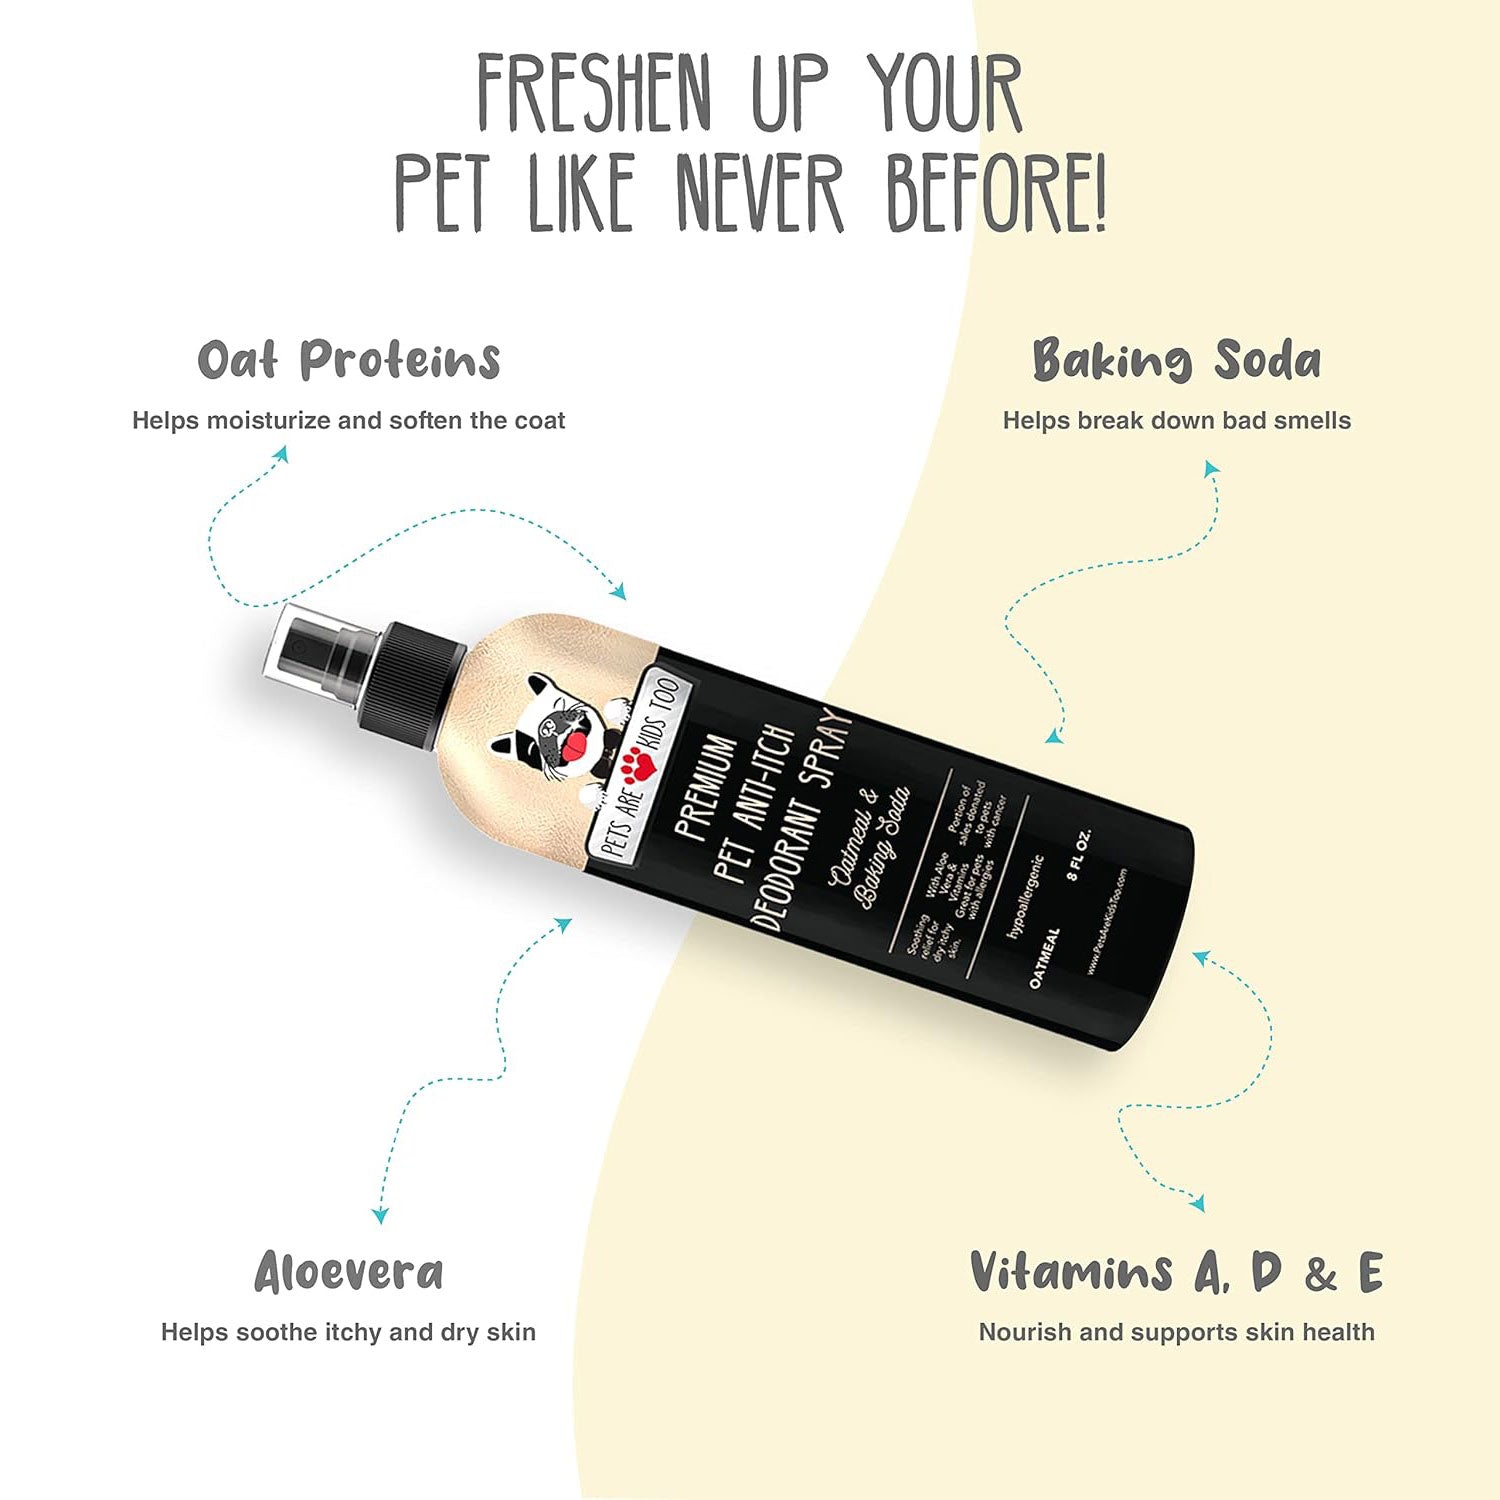 Freshen up your pet like never before